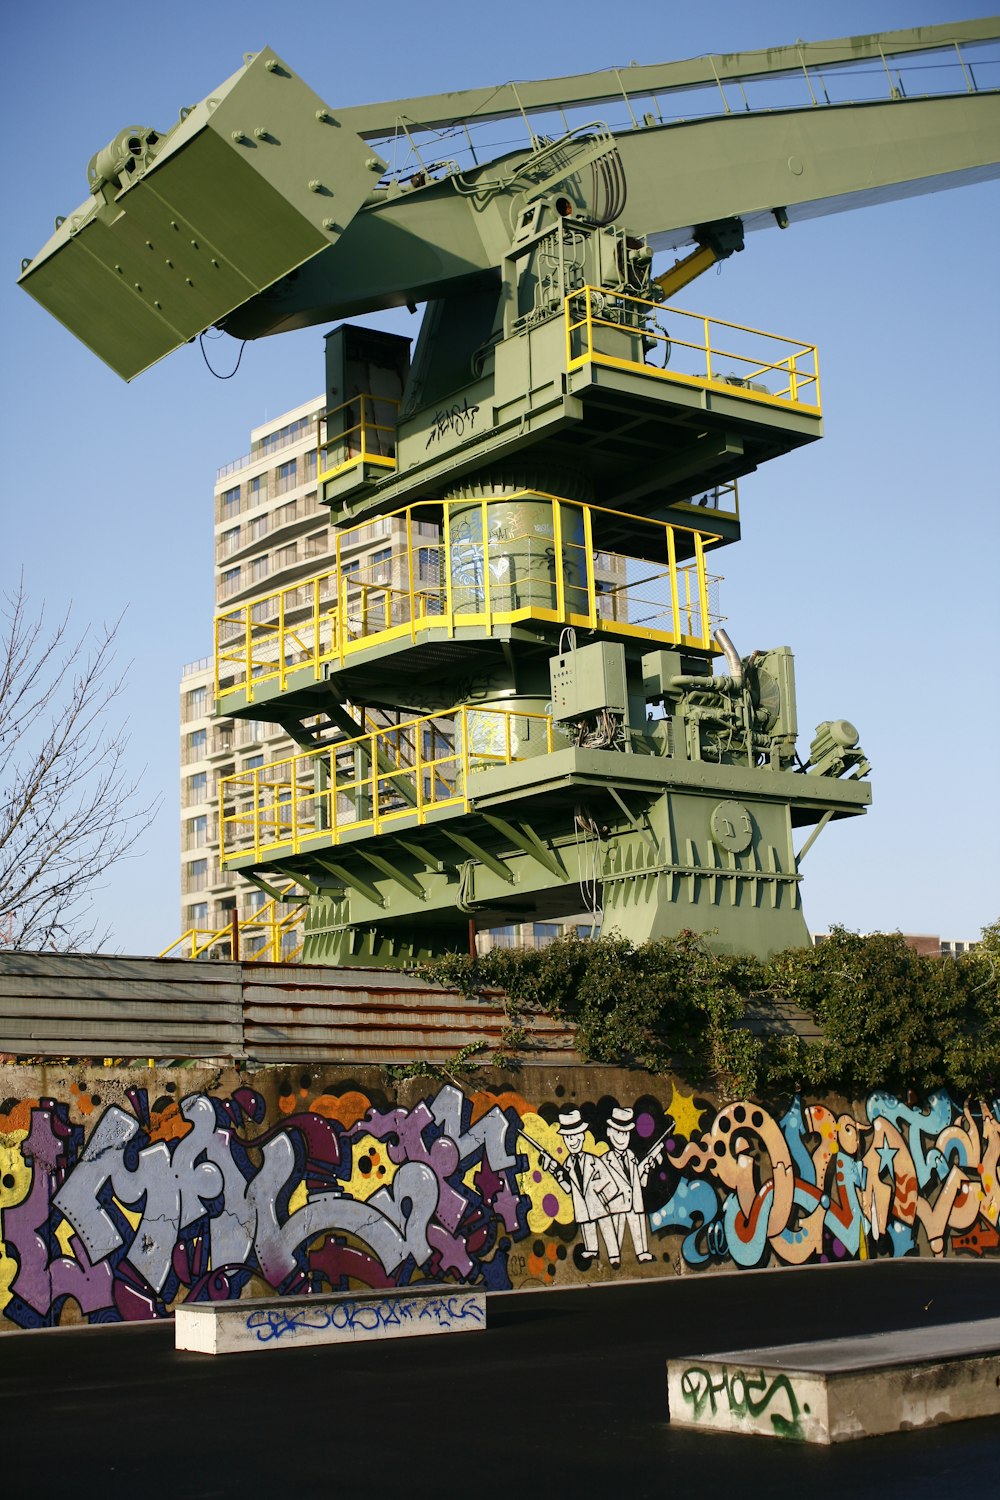 a large crane sitting next to a building with graffiti on it